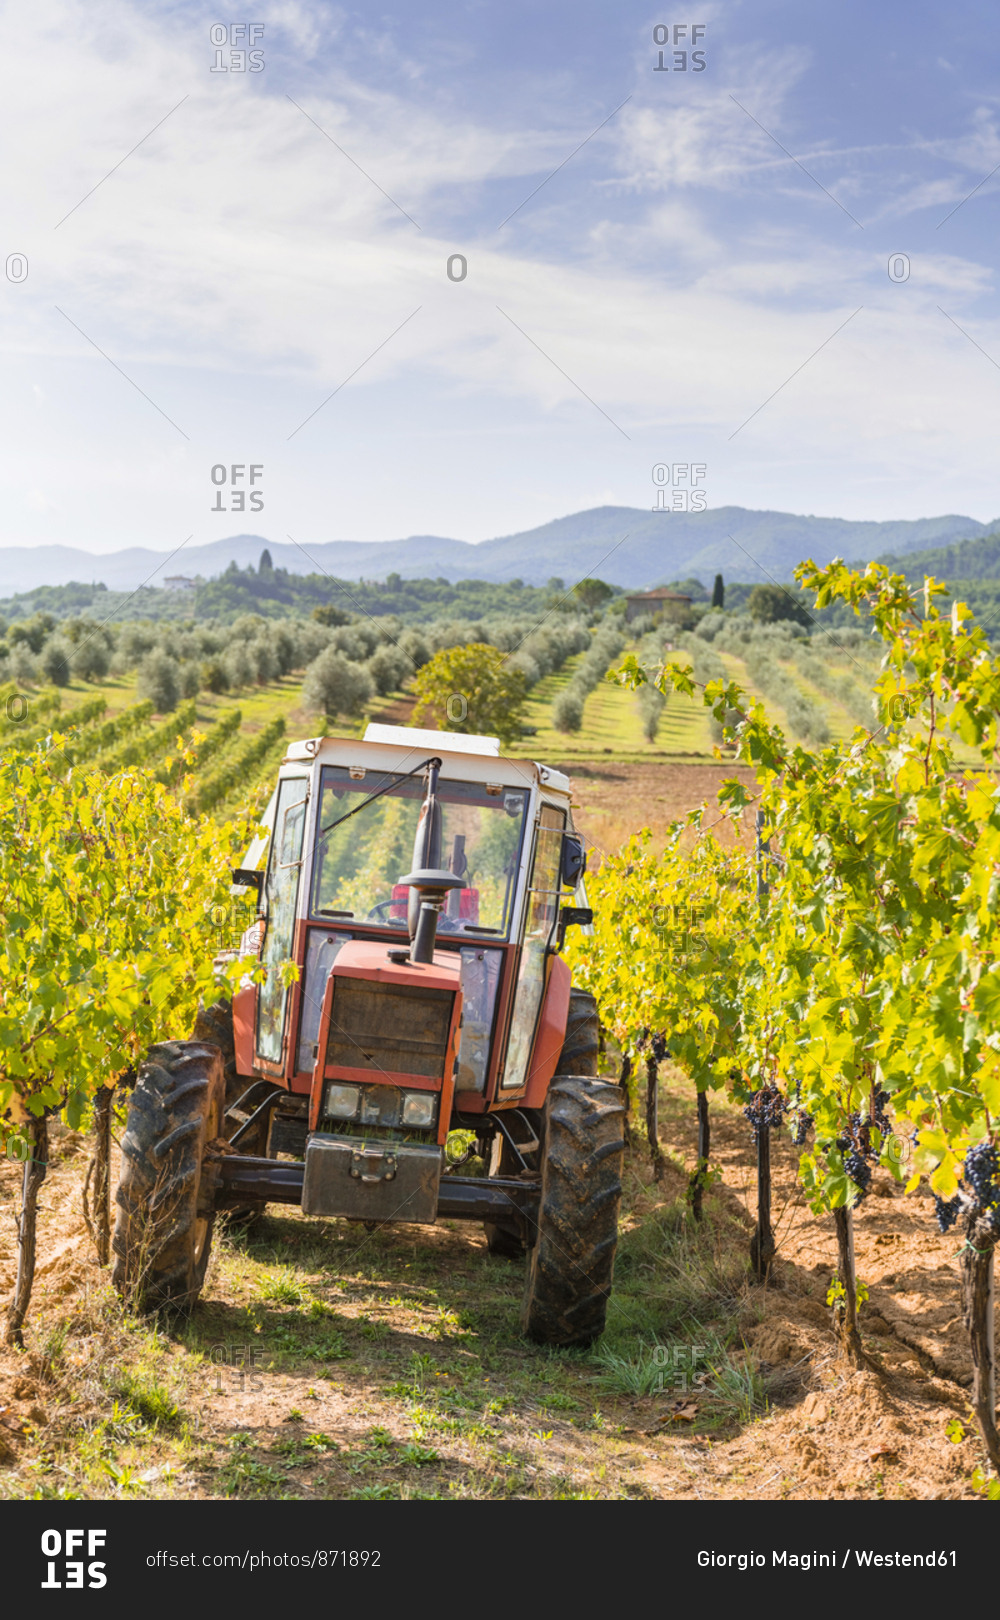 Tractor parked in a vineyard